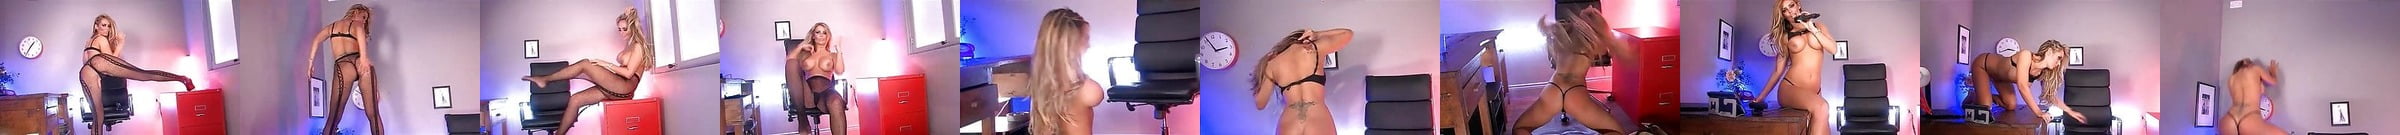 Lucy Summers Babestation 6072017 Part 2 Free Porn 99